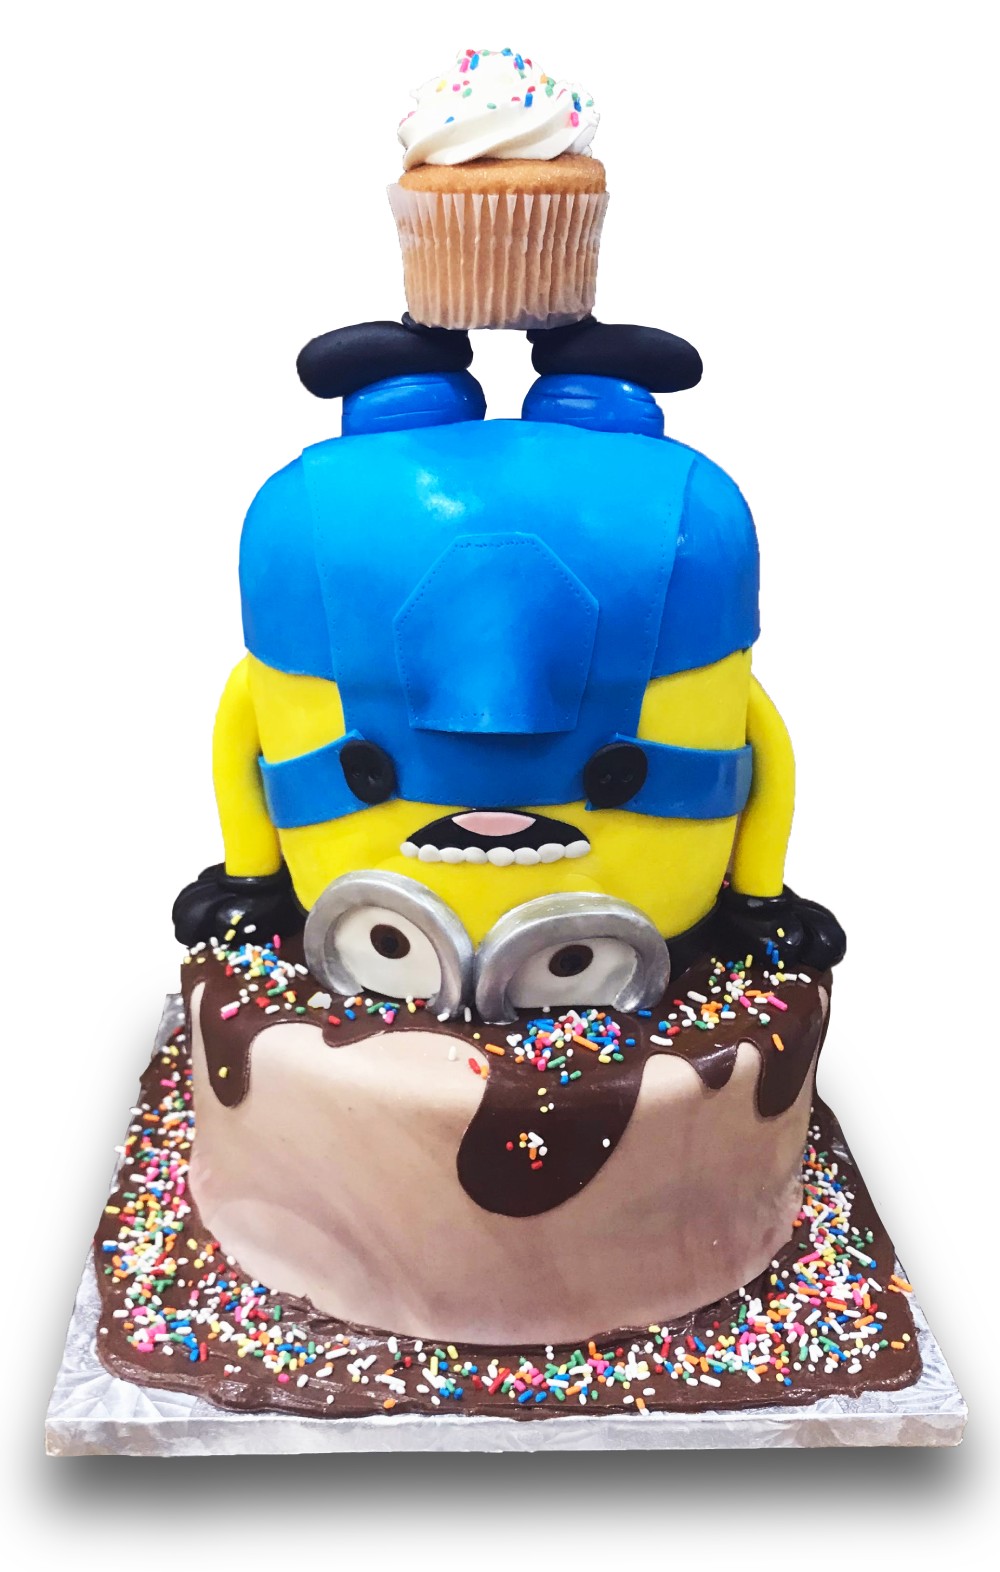 Handstand minion shaped cake covered in fondant